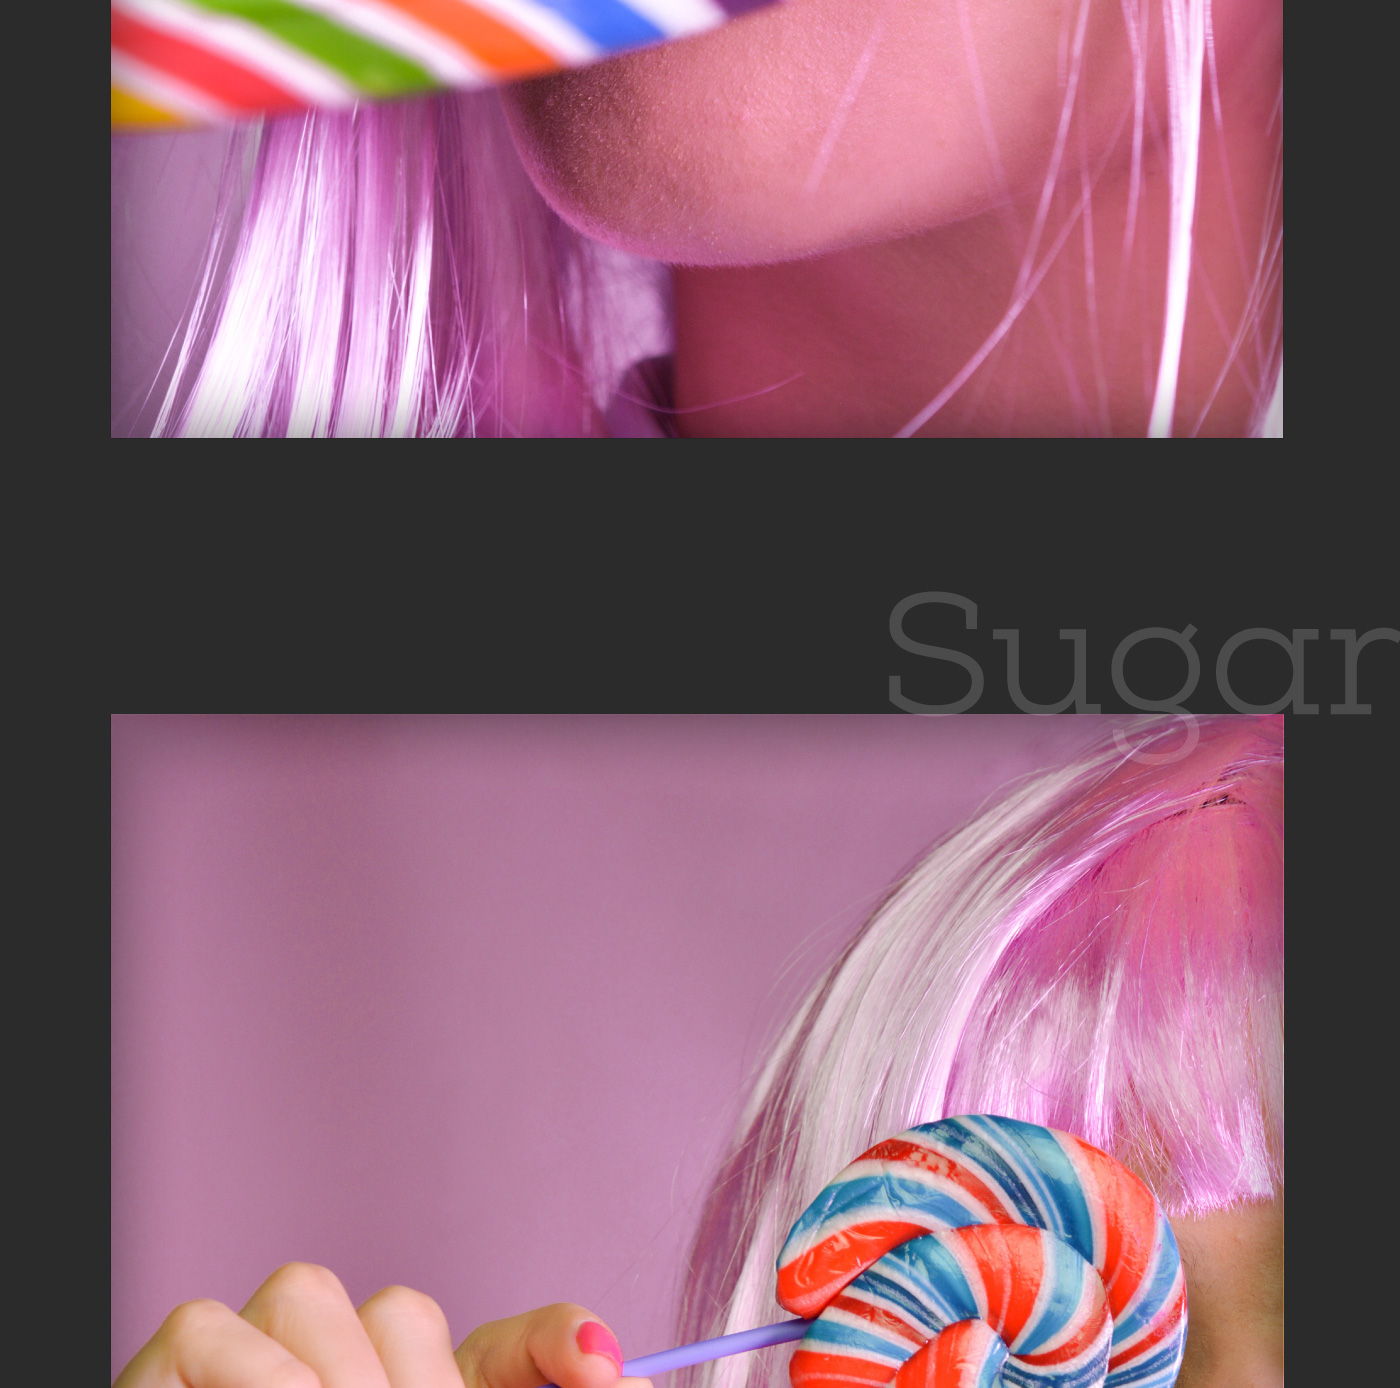 Photography  product art direction  Candy sweet girl products